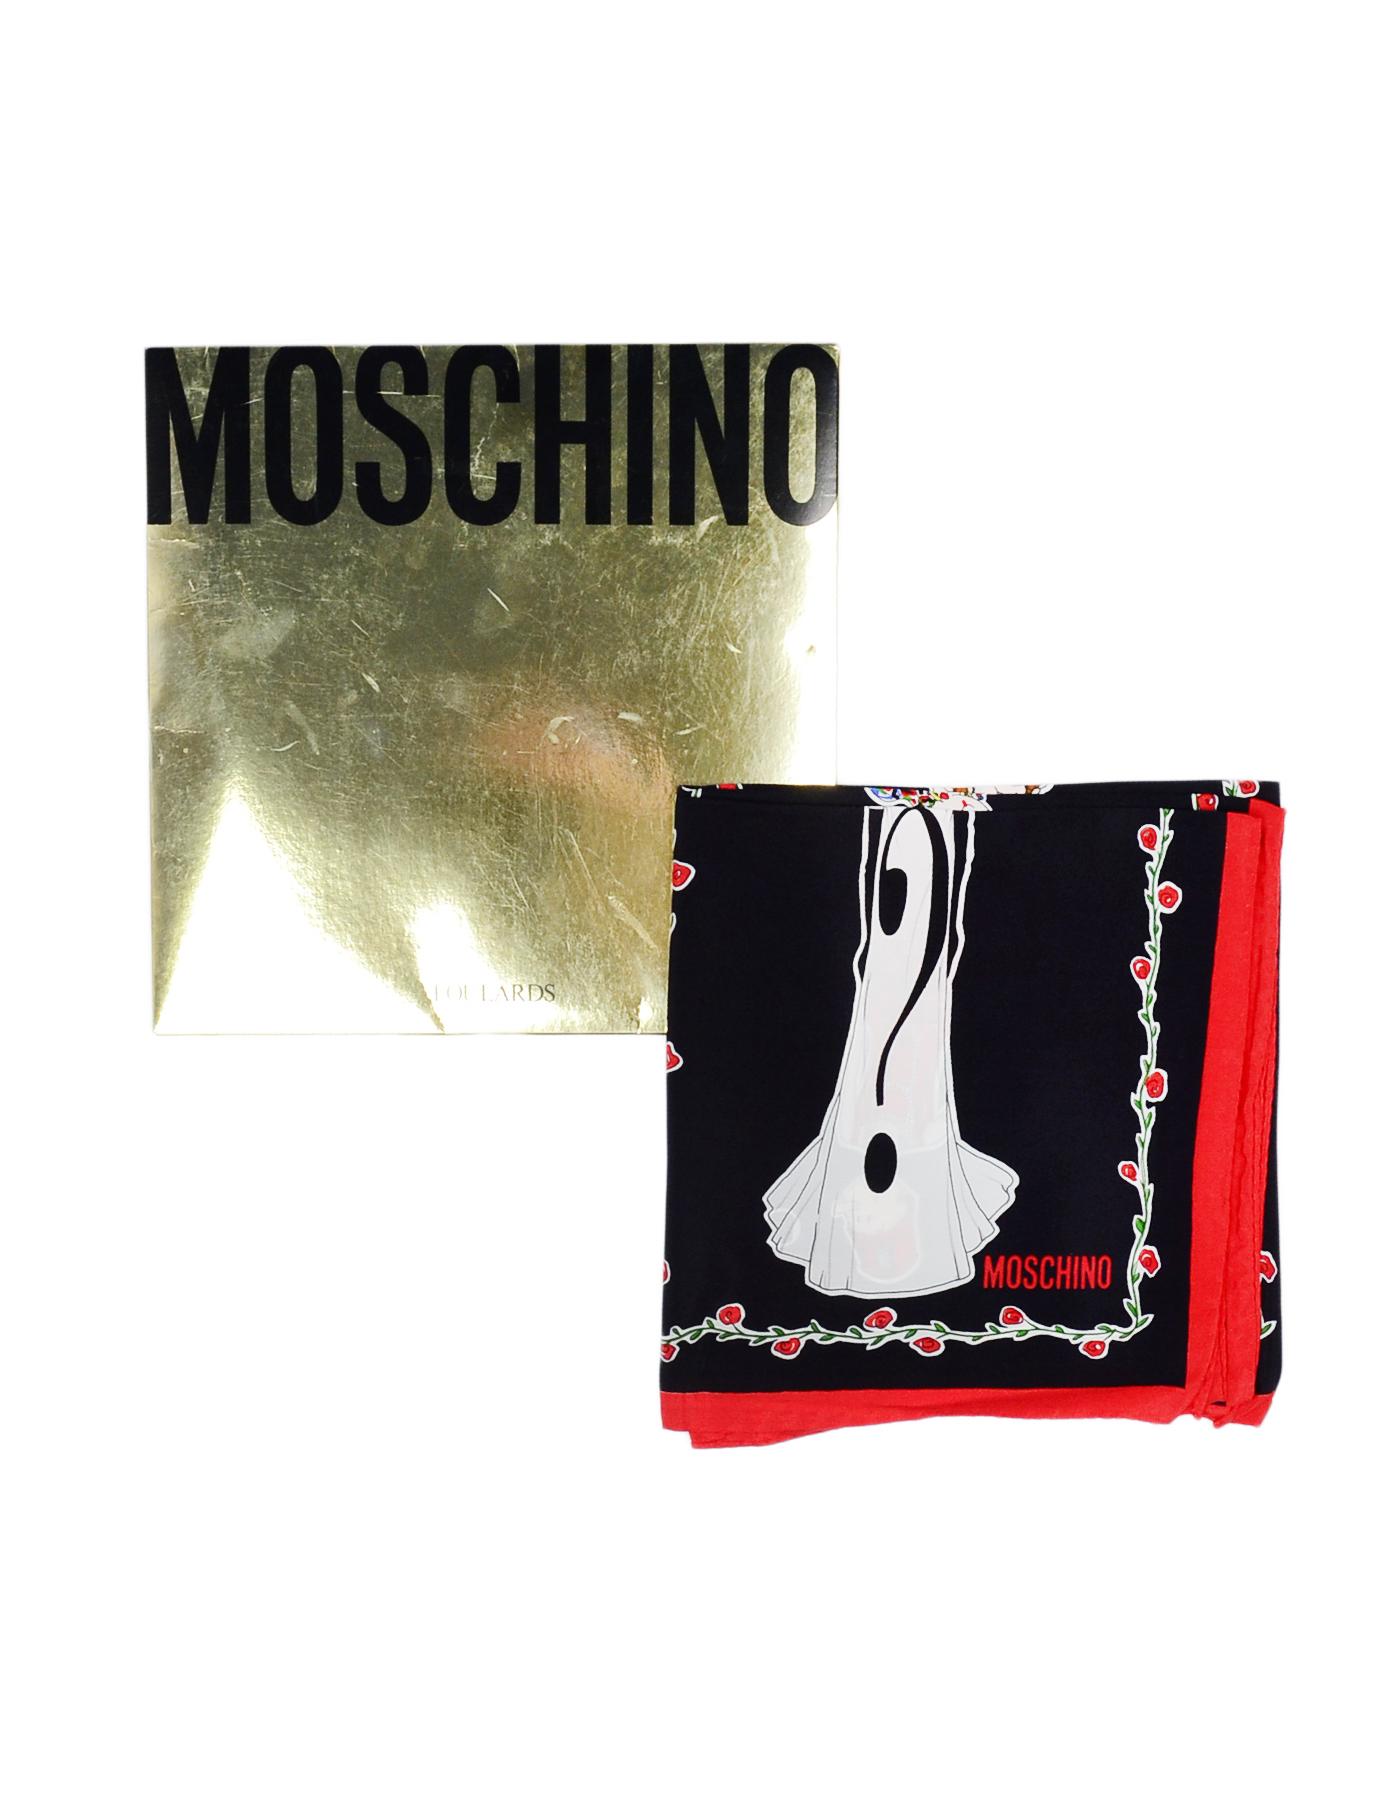 Moschino Black/Red Silk Olive Oil Scarf w/ Envelope  2